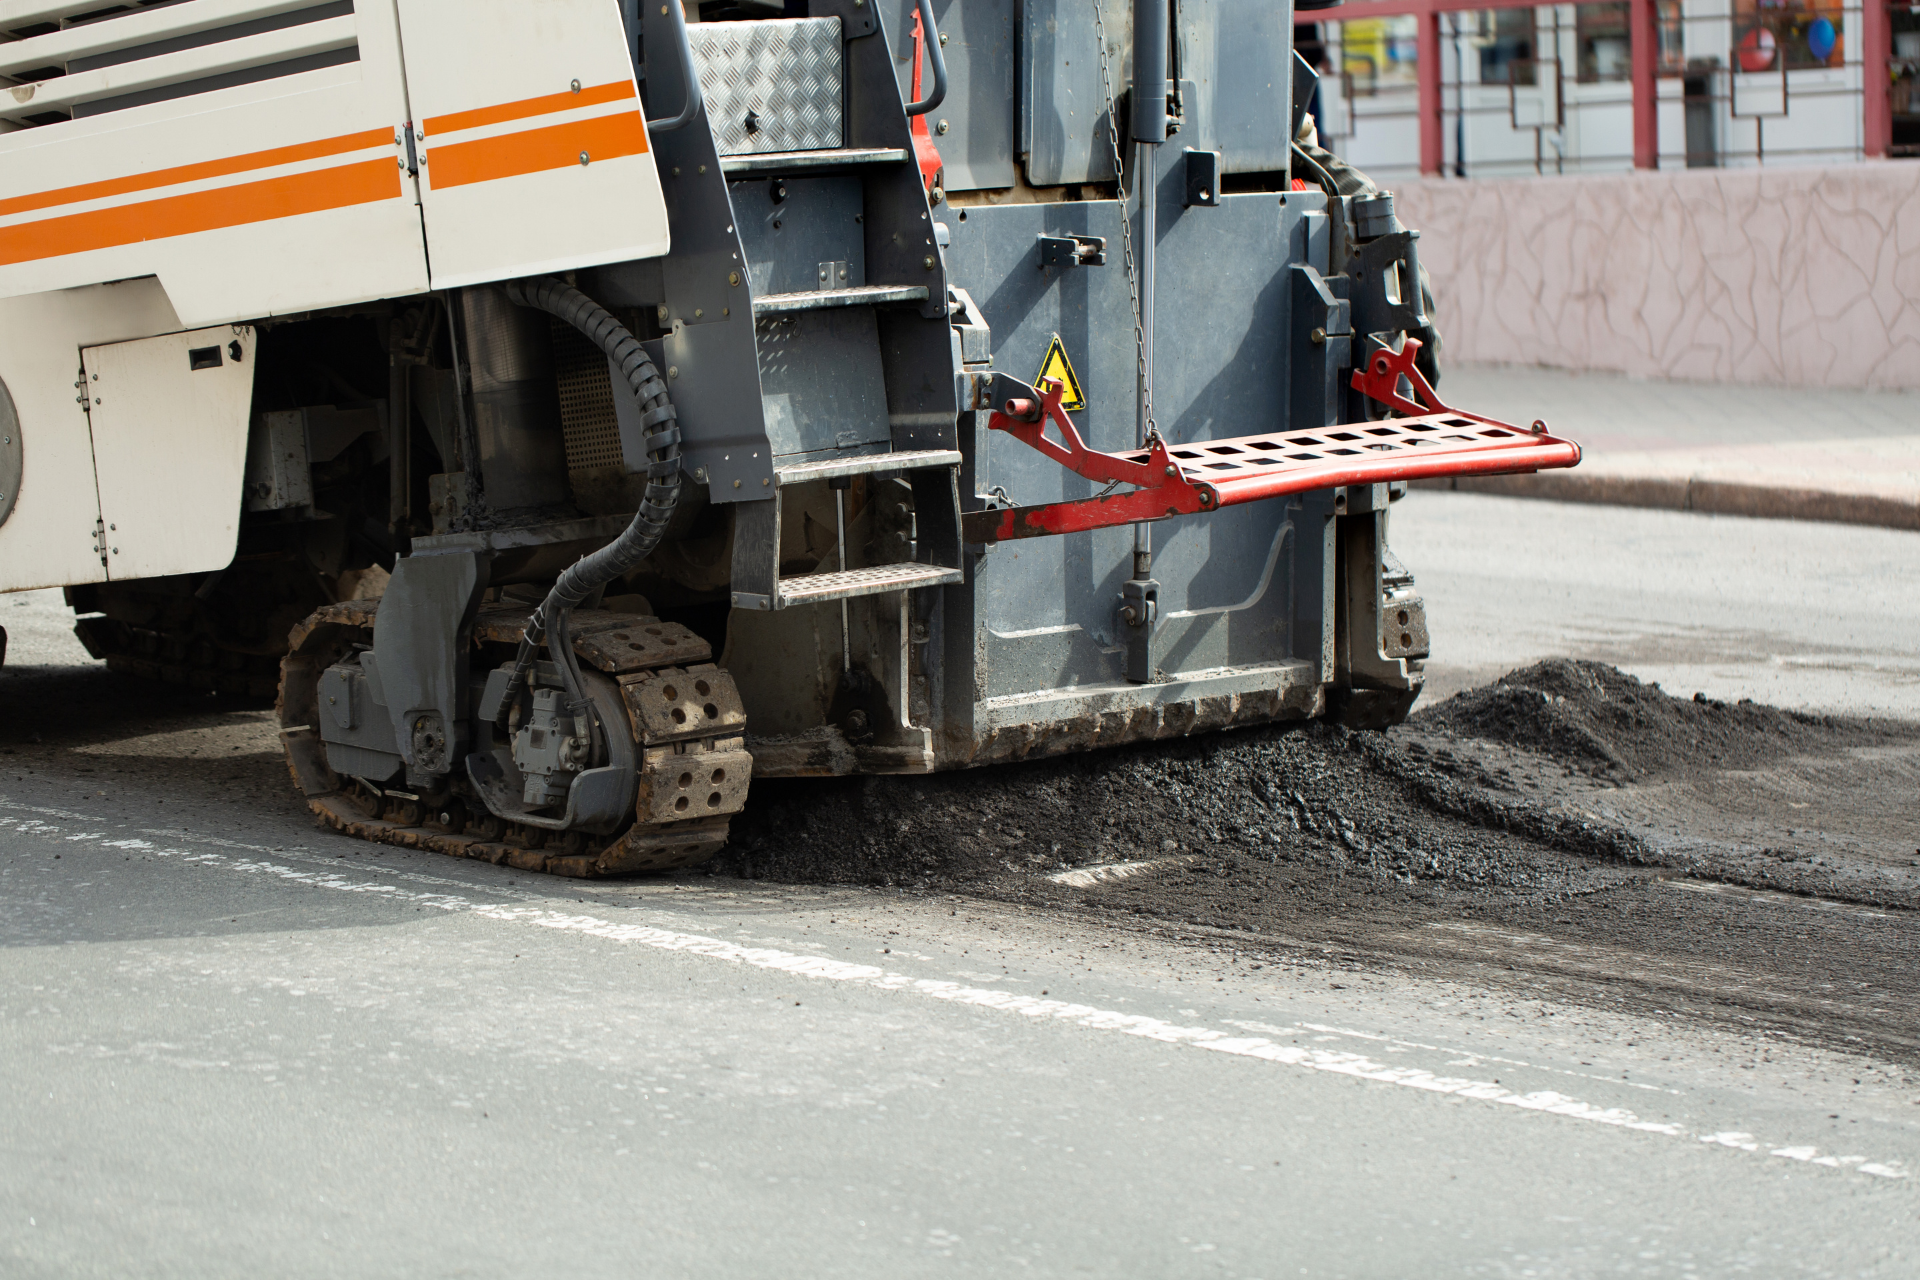 Affordable Asphalt Milling Machine Rentals in Chester County, PA